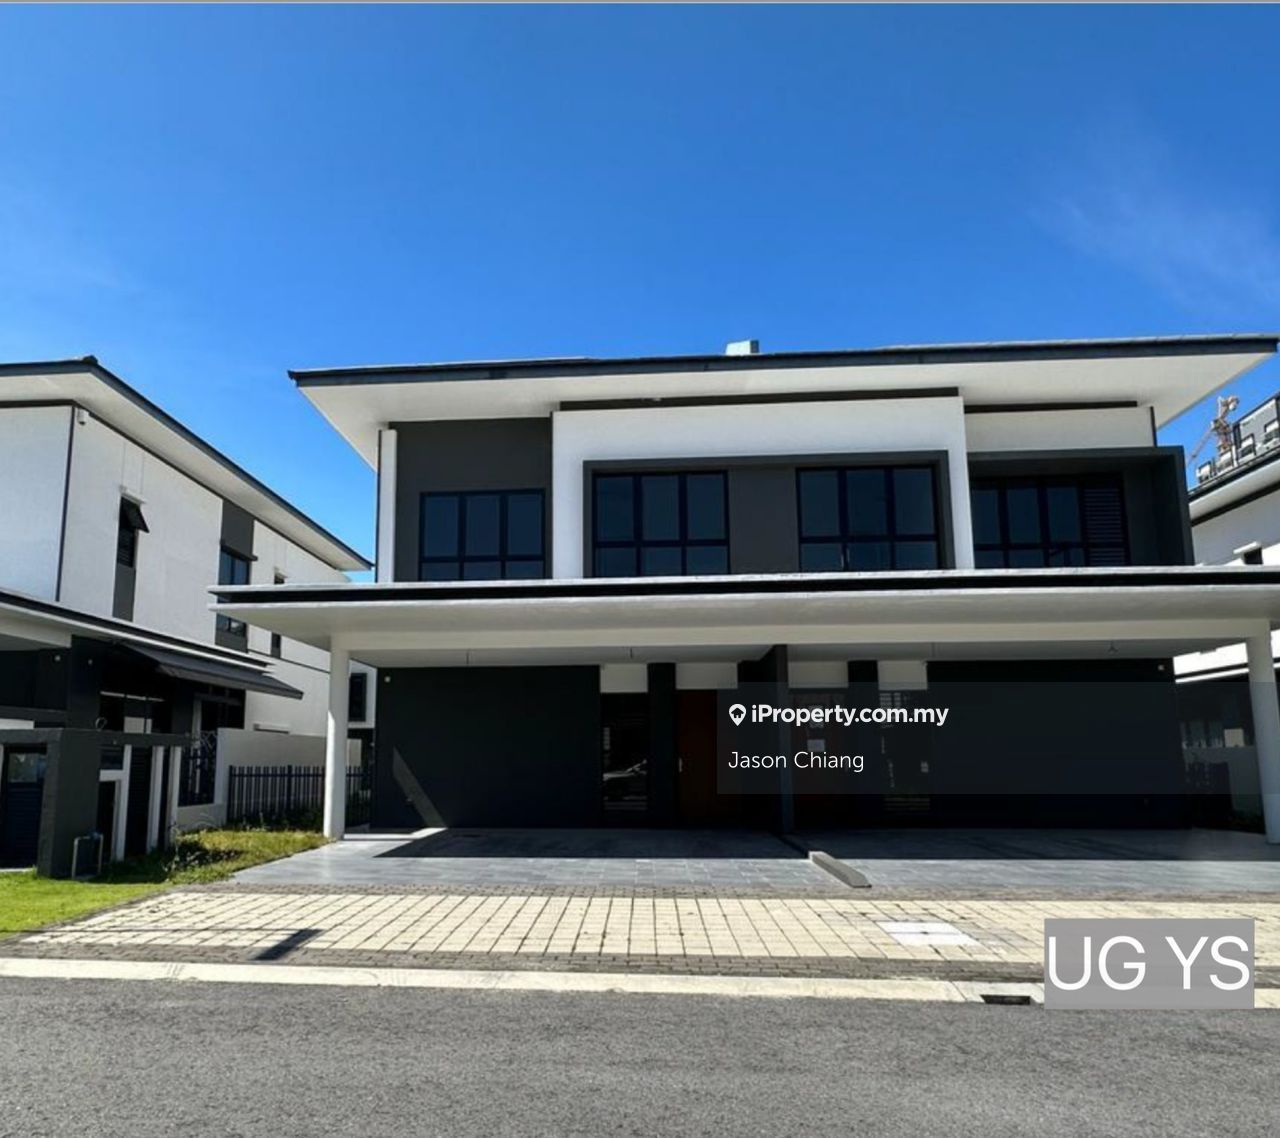 Brand New Unit -Facing south west -Double Storey Semi-D